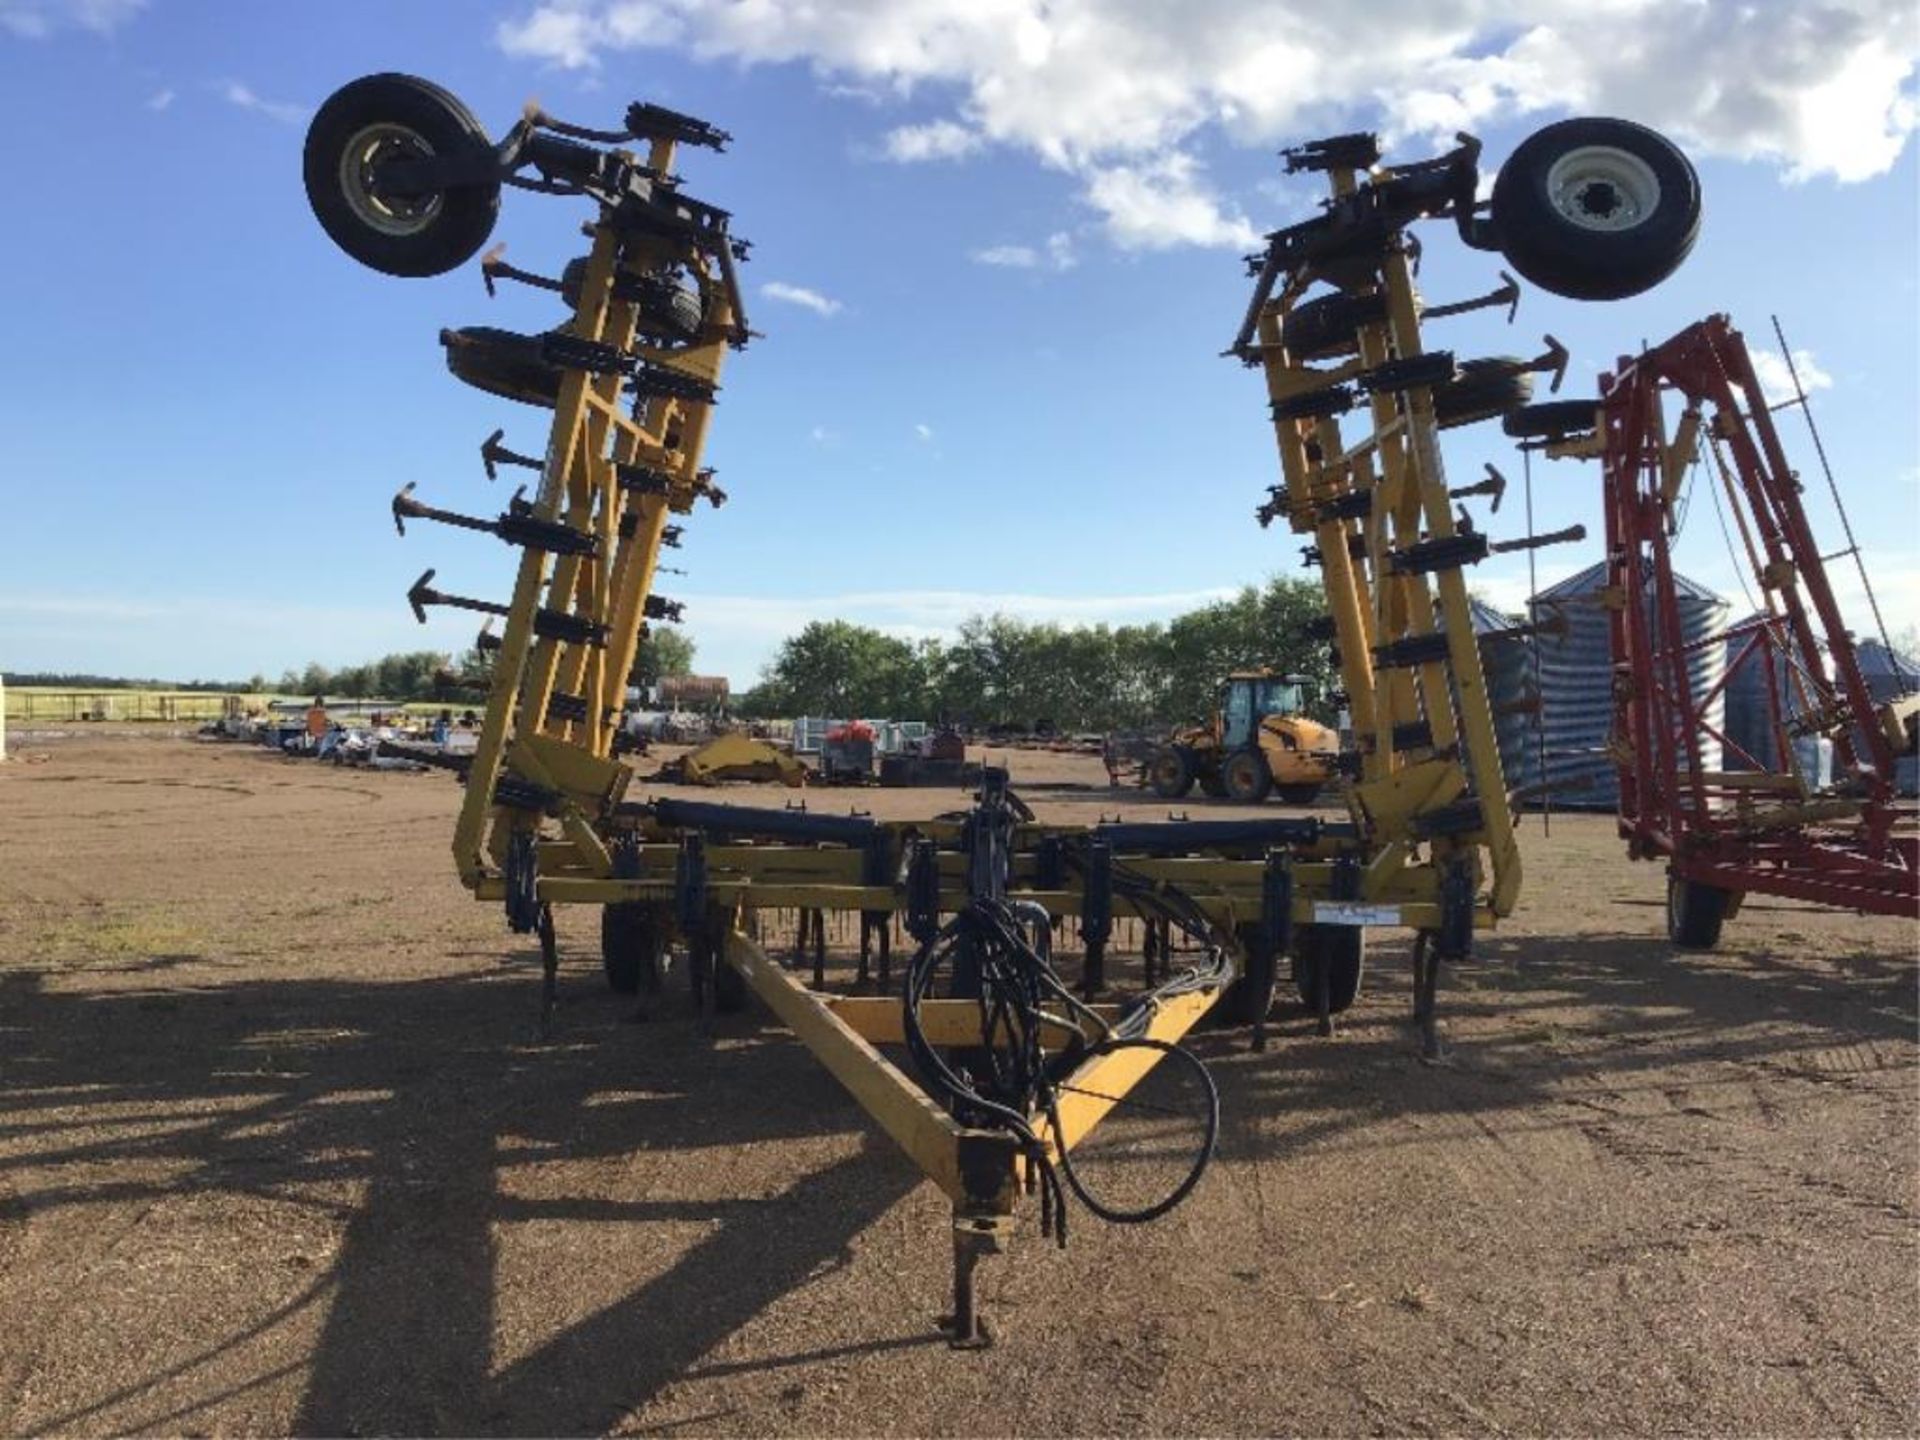 3500 Ezee-On 40ft Cultivator 8in Spacing, Floating Hitch, Mounted Tine Harrows, Hyd Lines at Rear